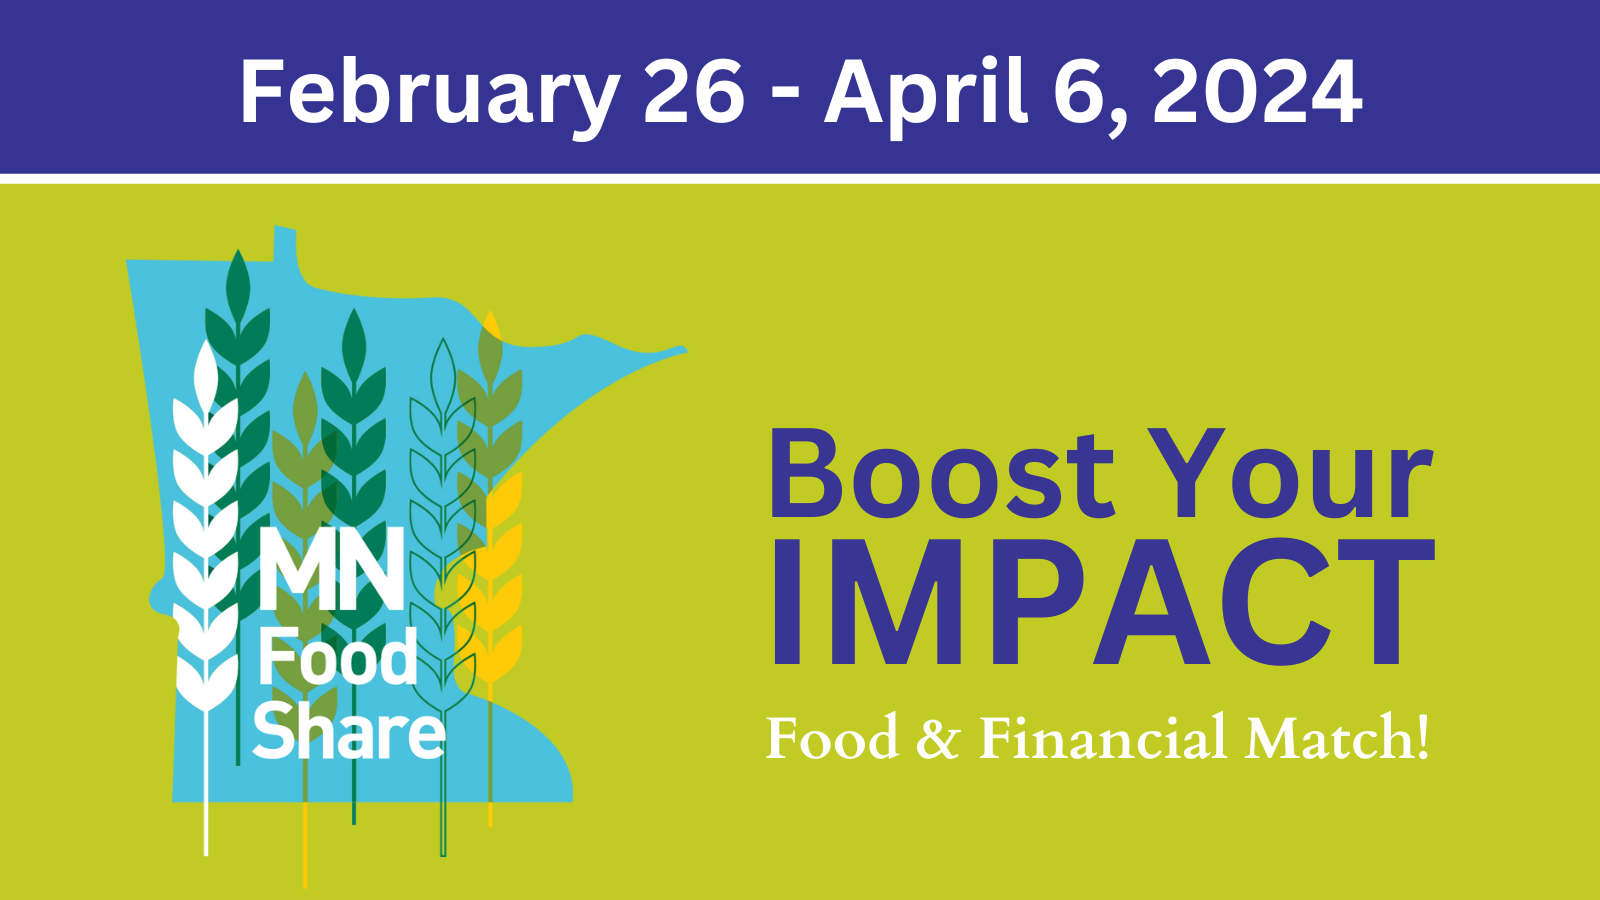 MN Foodshare - Boost your impact